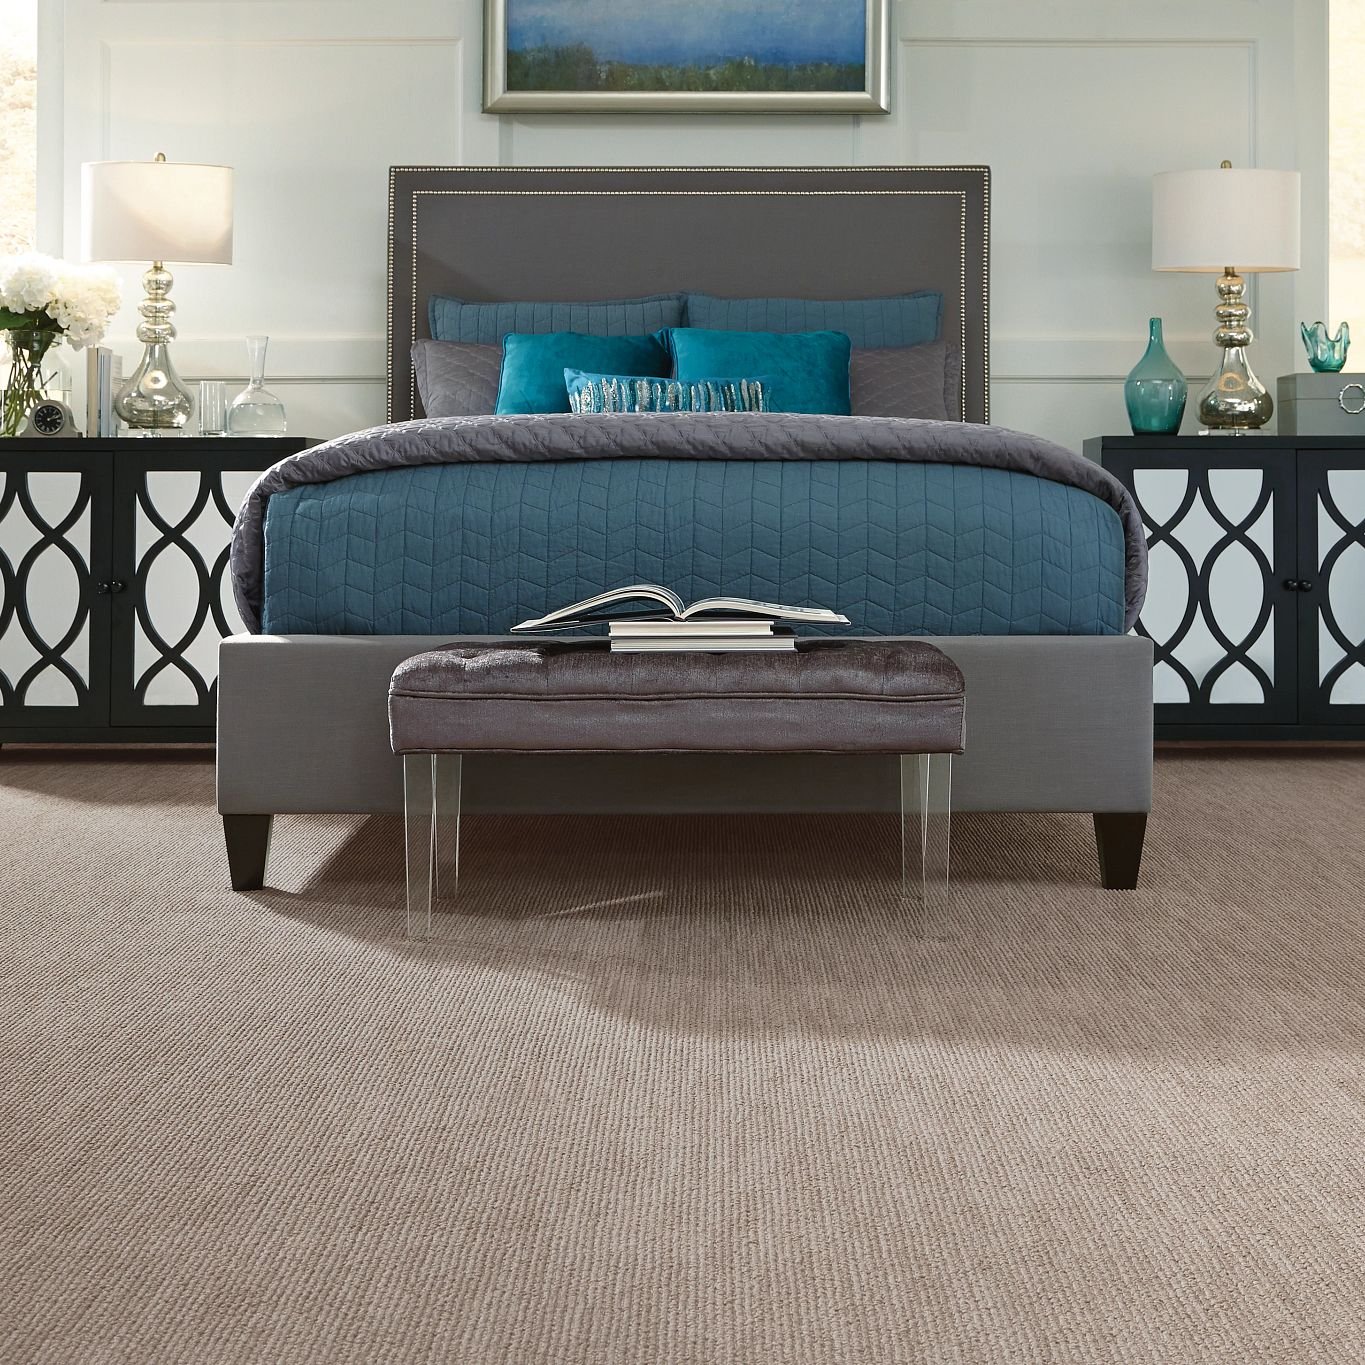 Carpet Flooring Solution Articles By Select Floors AB